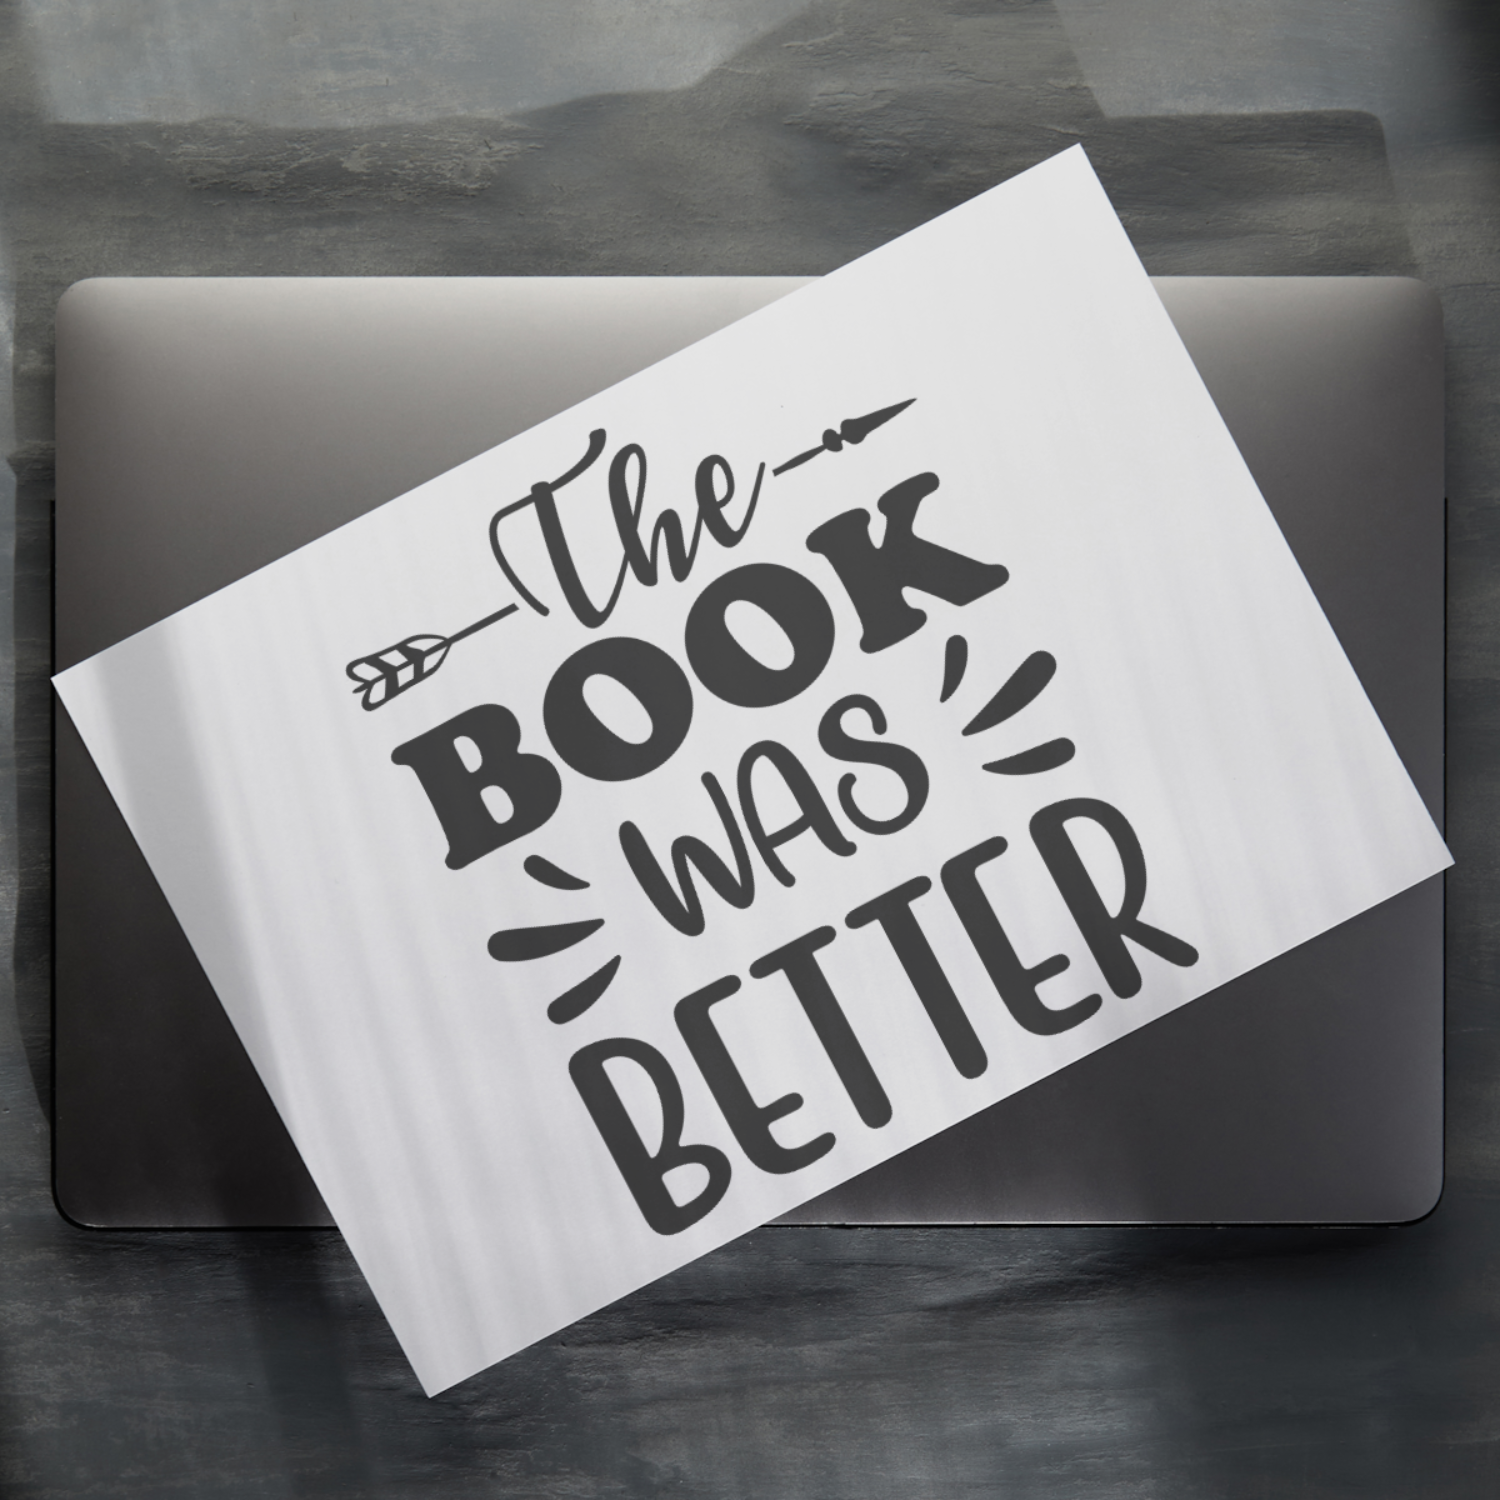 The Book Was Better SVG | Digital Download | Cut File | SVG - Only The Sweet Stuff